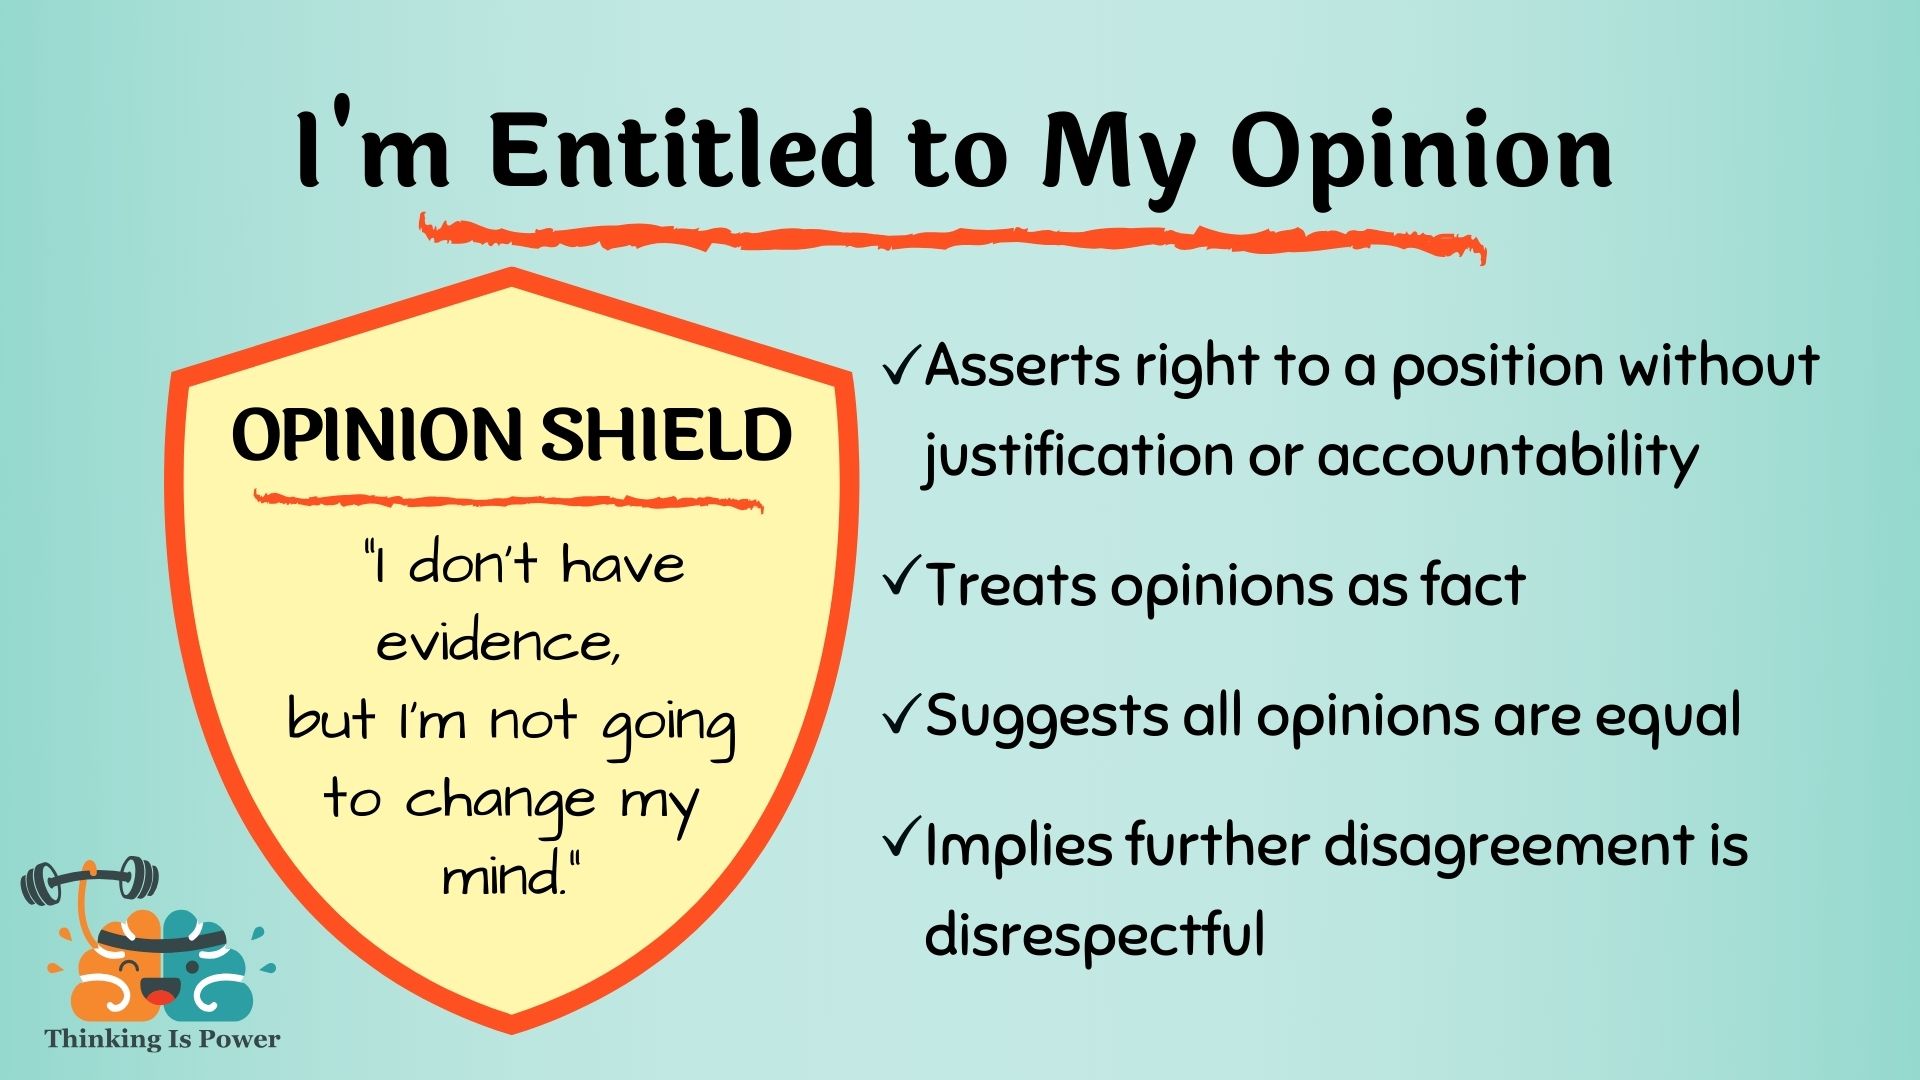 I'm entitled to my opinion asserts a right to a position without justification or accountability, treats opinions as fact, suggests all opinions are equal, and implies further disagreement is disrespectful; hide behind opinion shield don't have evidence but not going to change mind